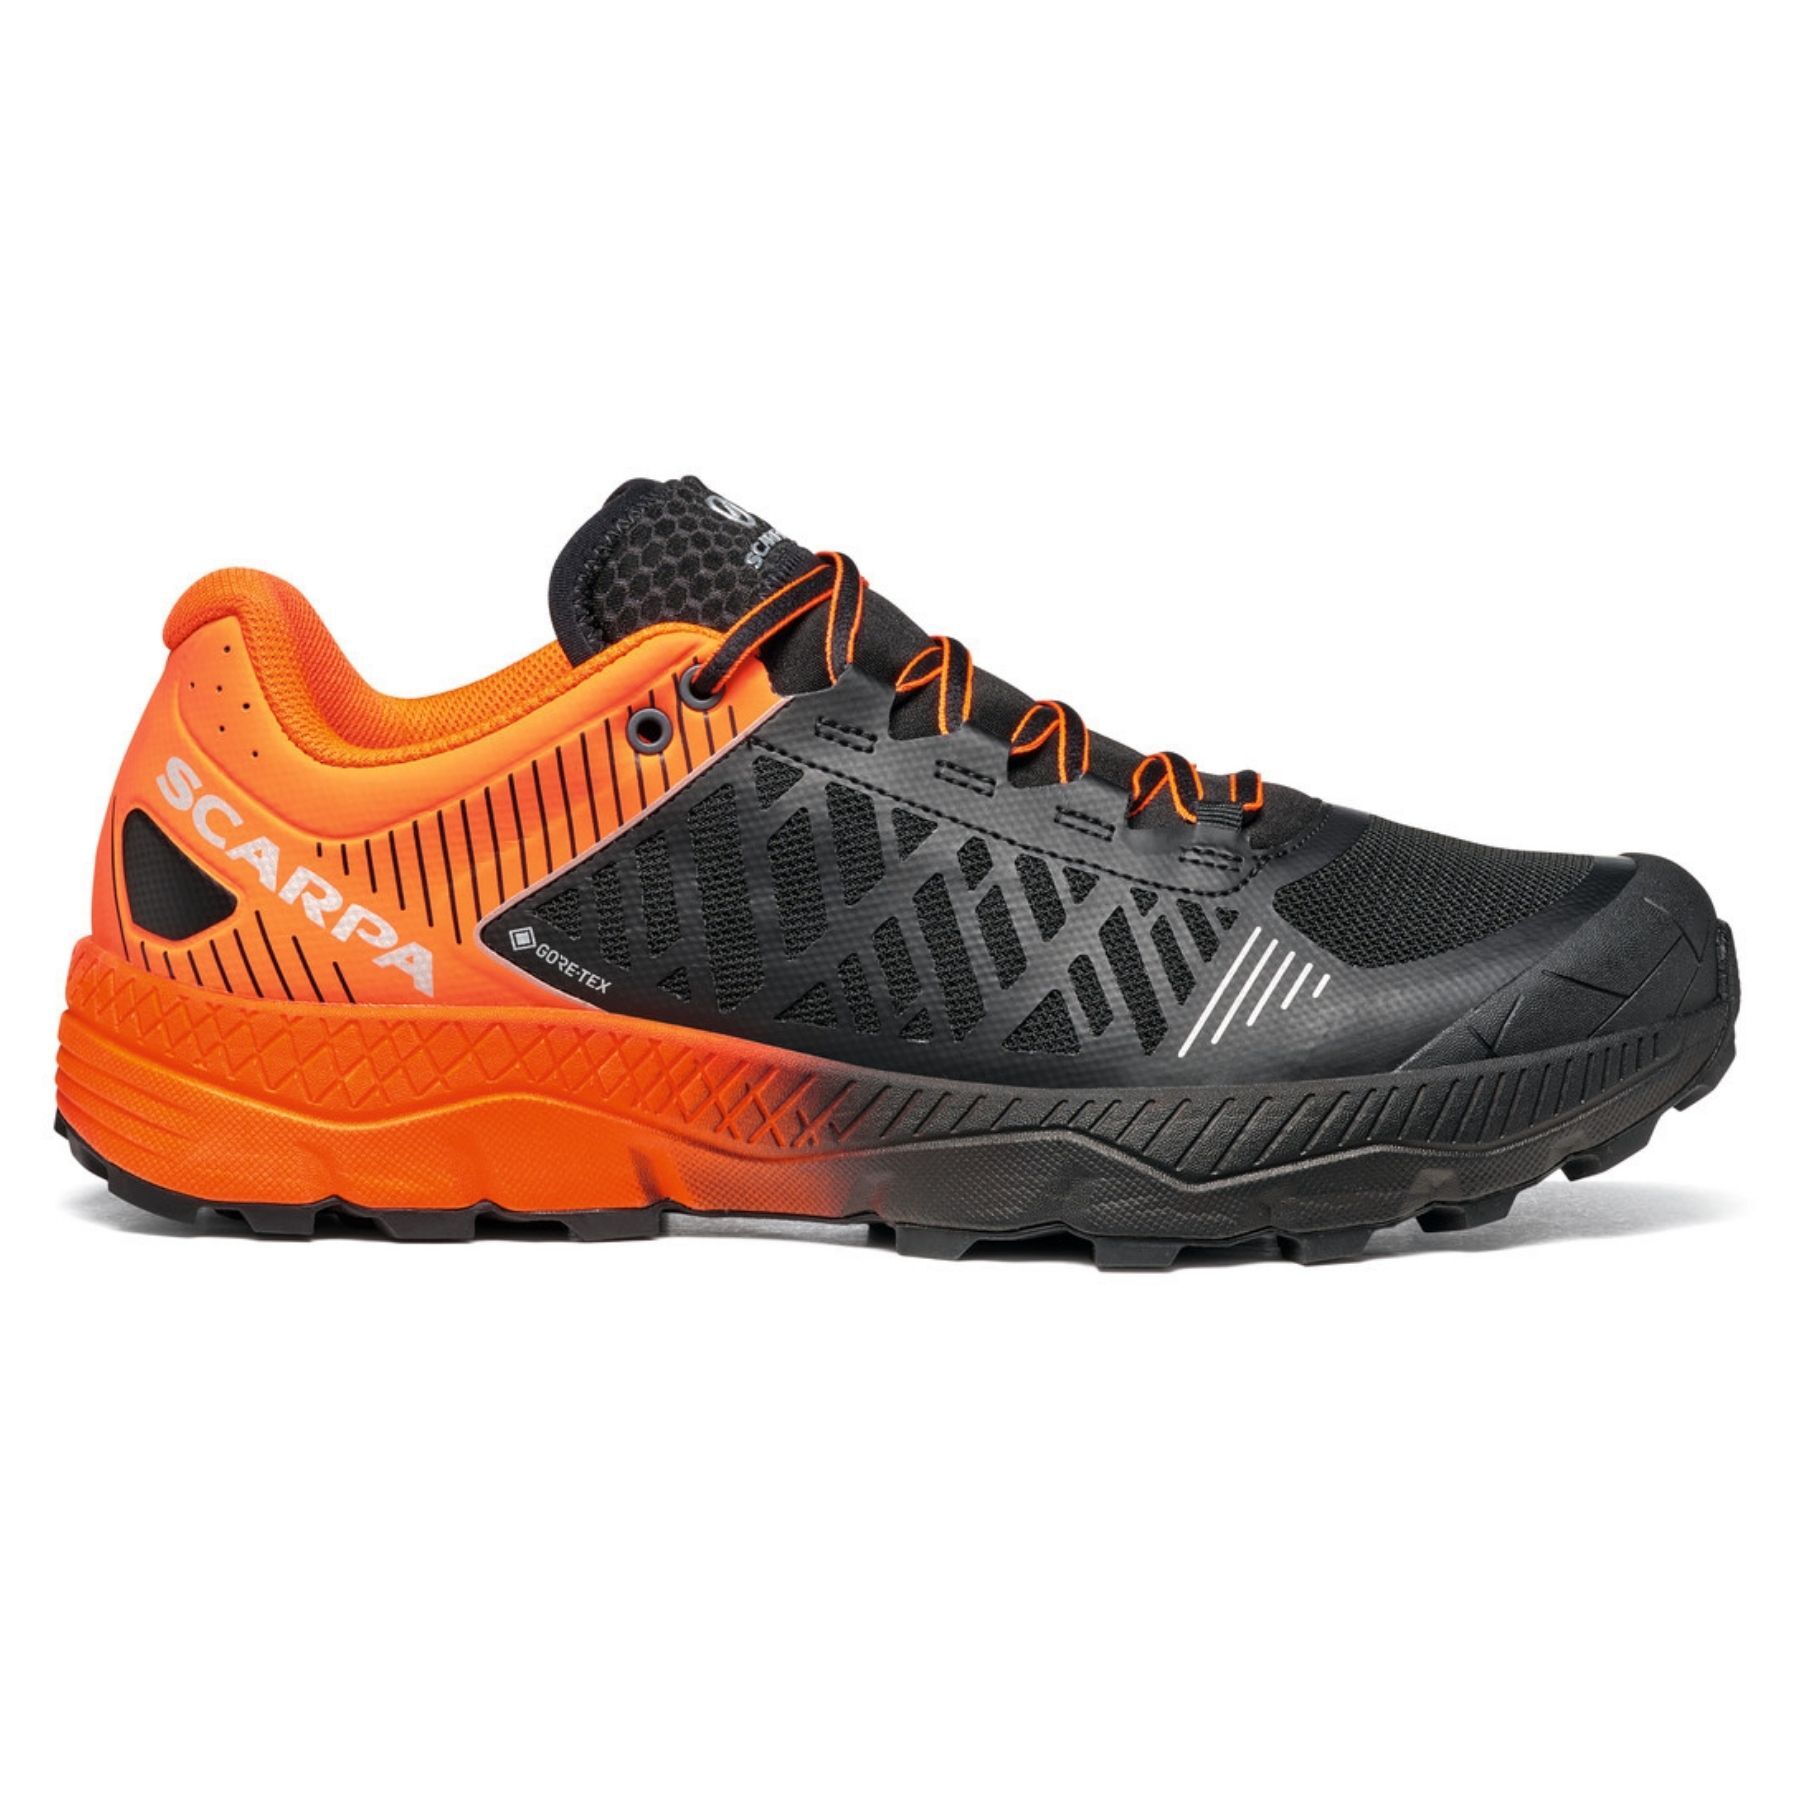 Scarpa Spin Ultra GTX - Trail running shoes - Men's